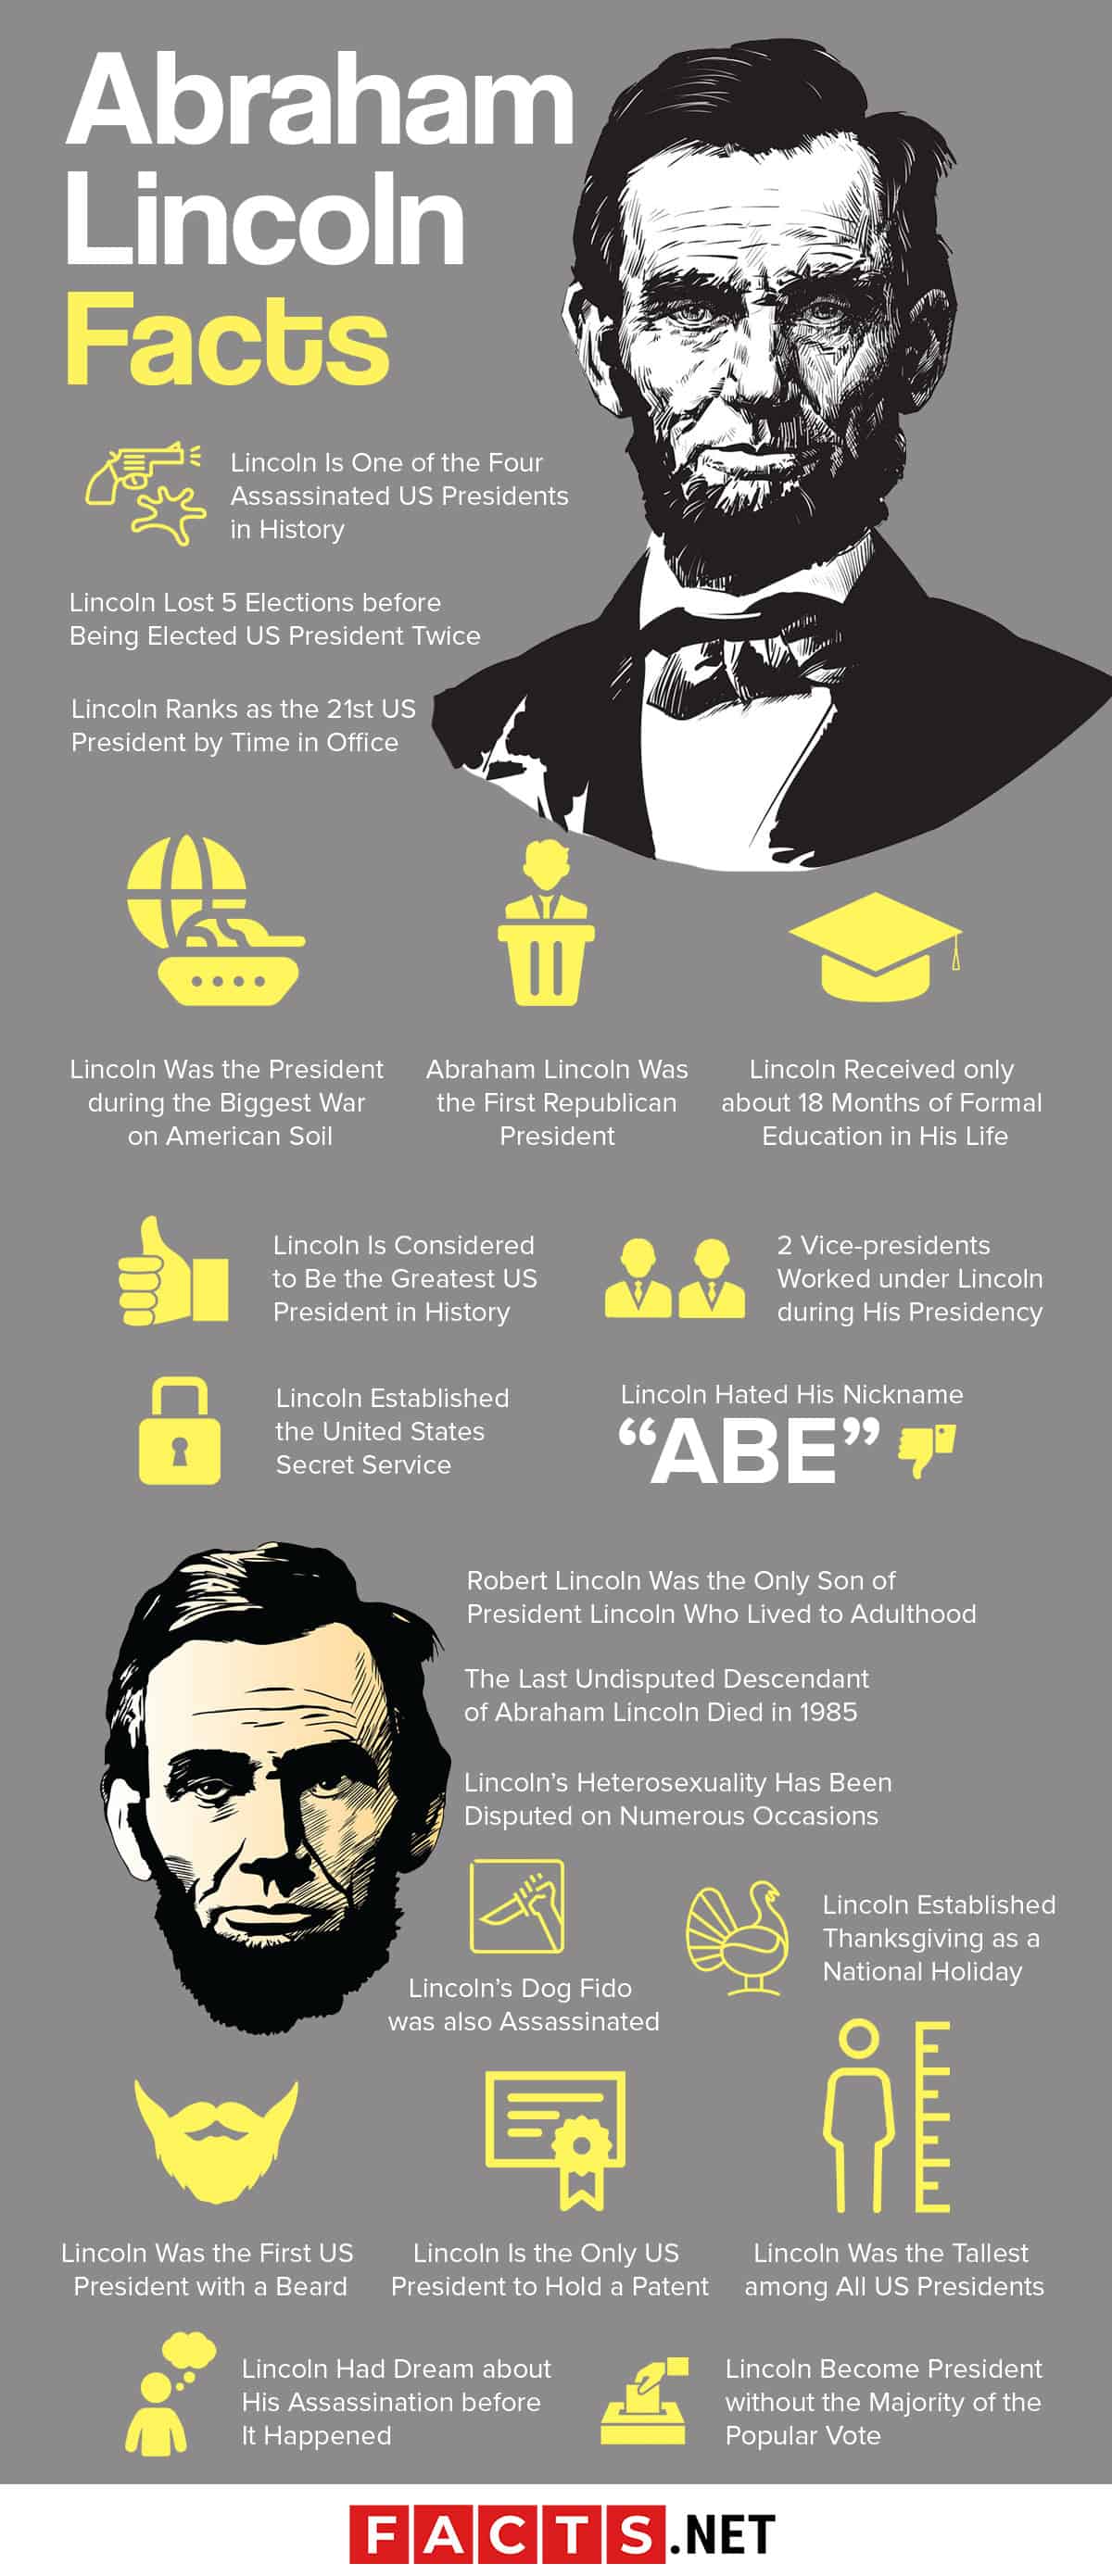 What are 7 interesting facts about Abraham Lincoln?